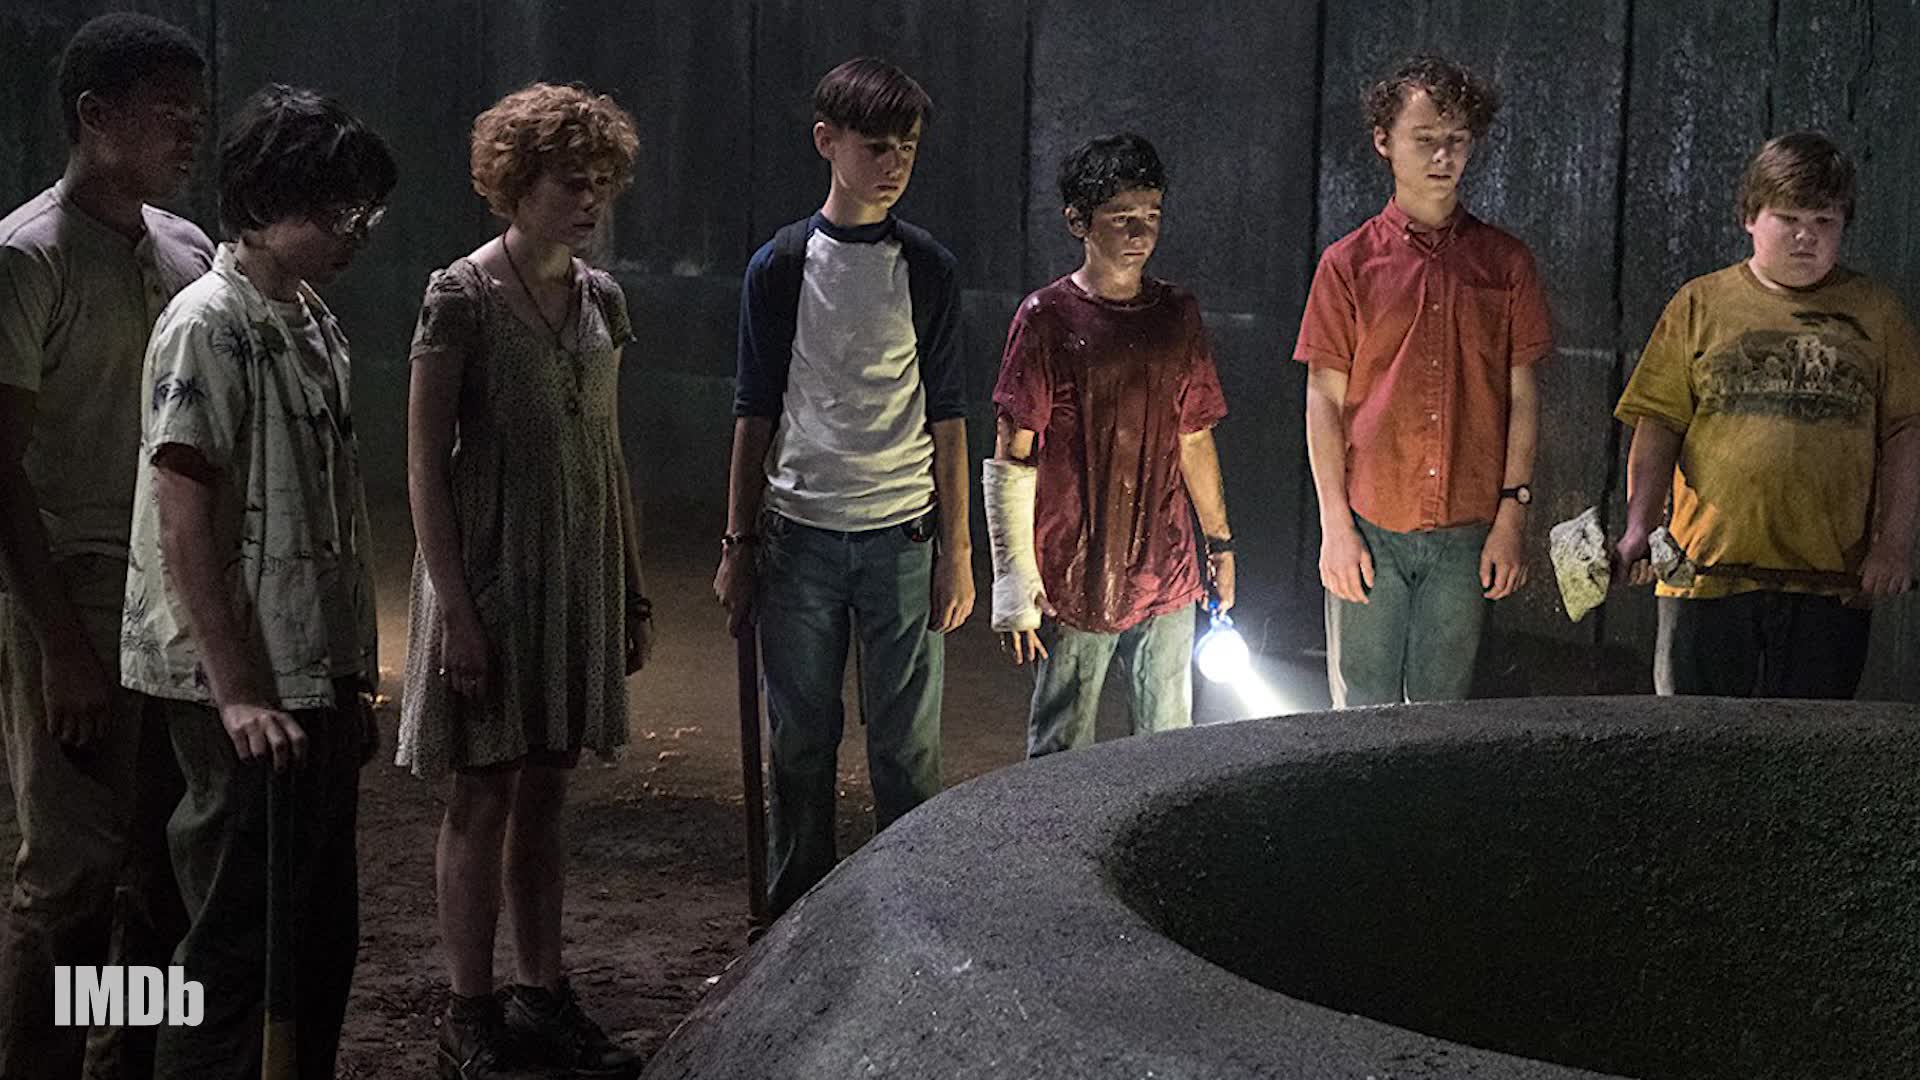 The 'It' Kids Love the '80s from IMDb on the Scene (2015-)